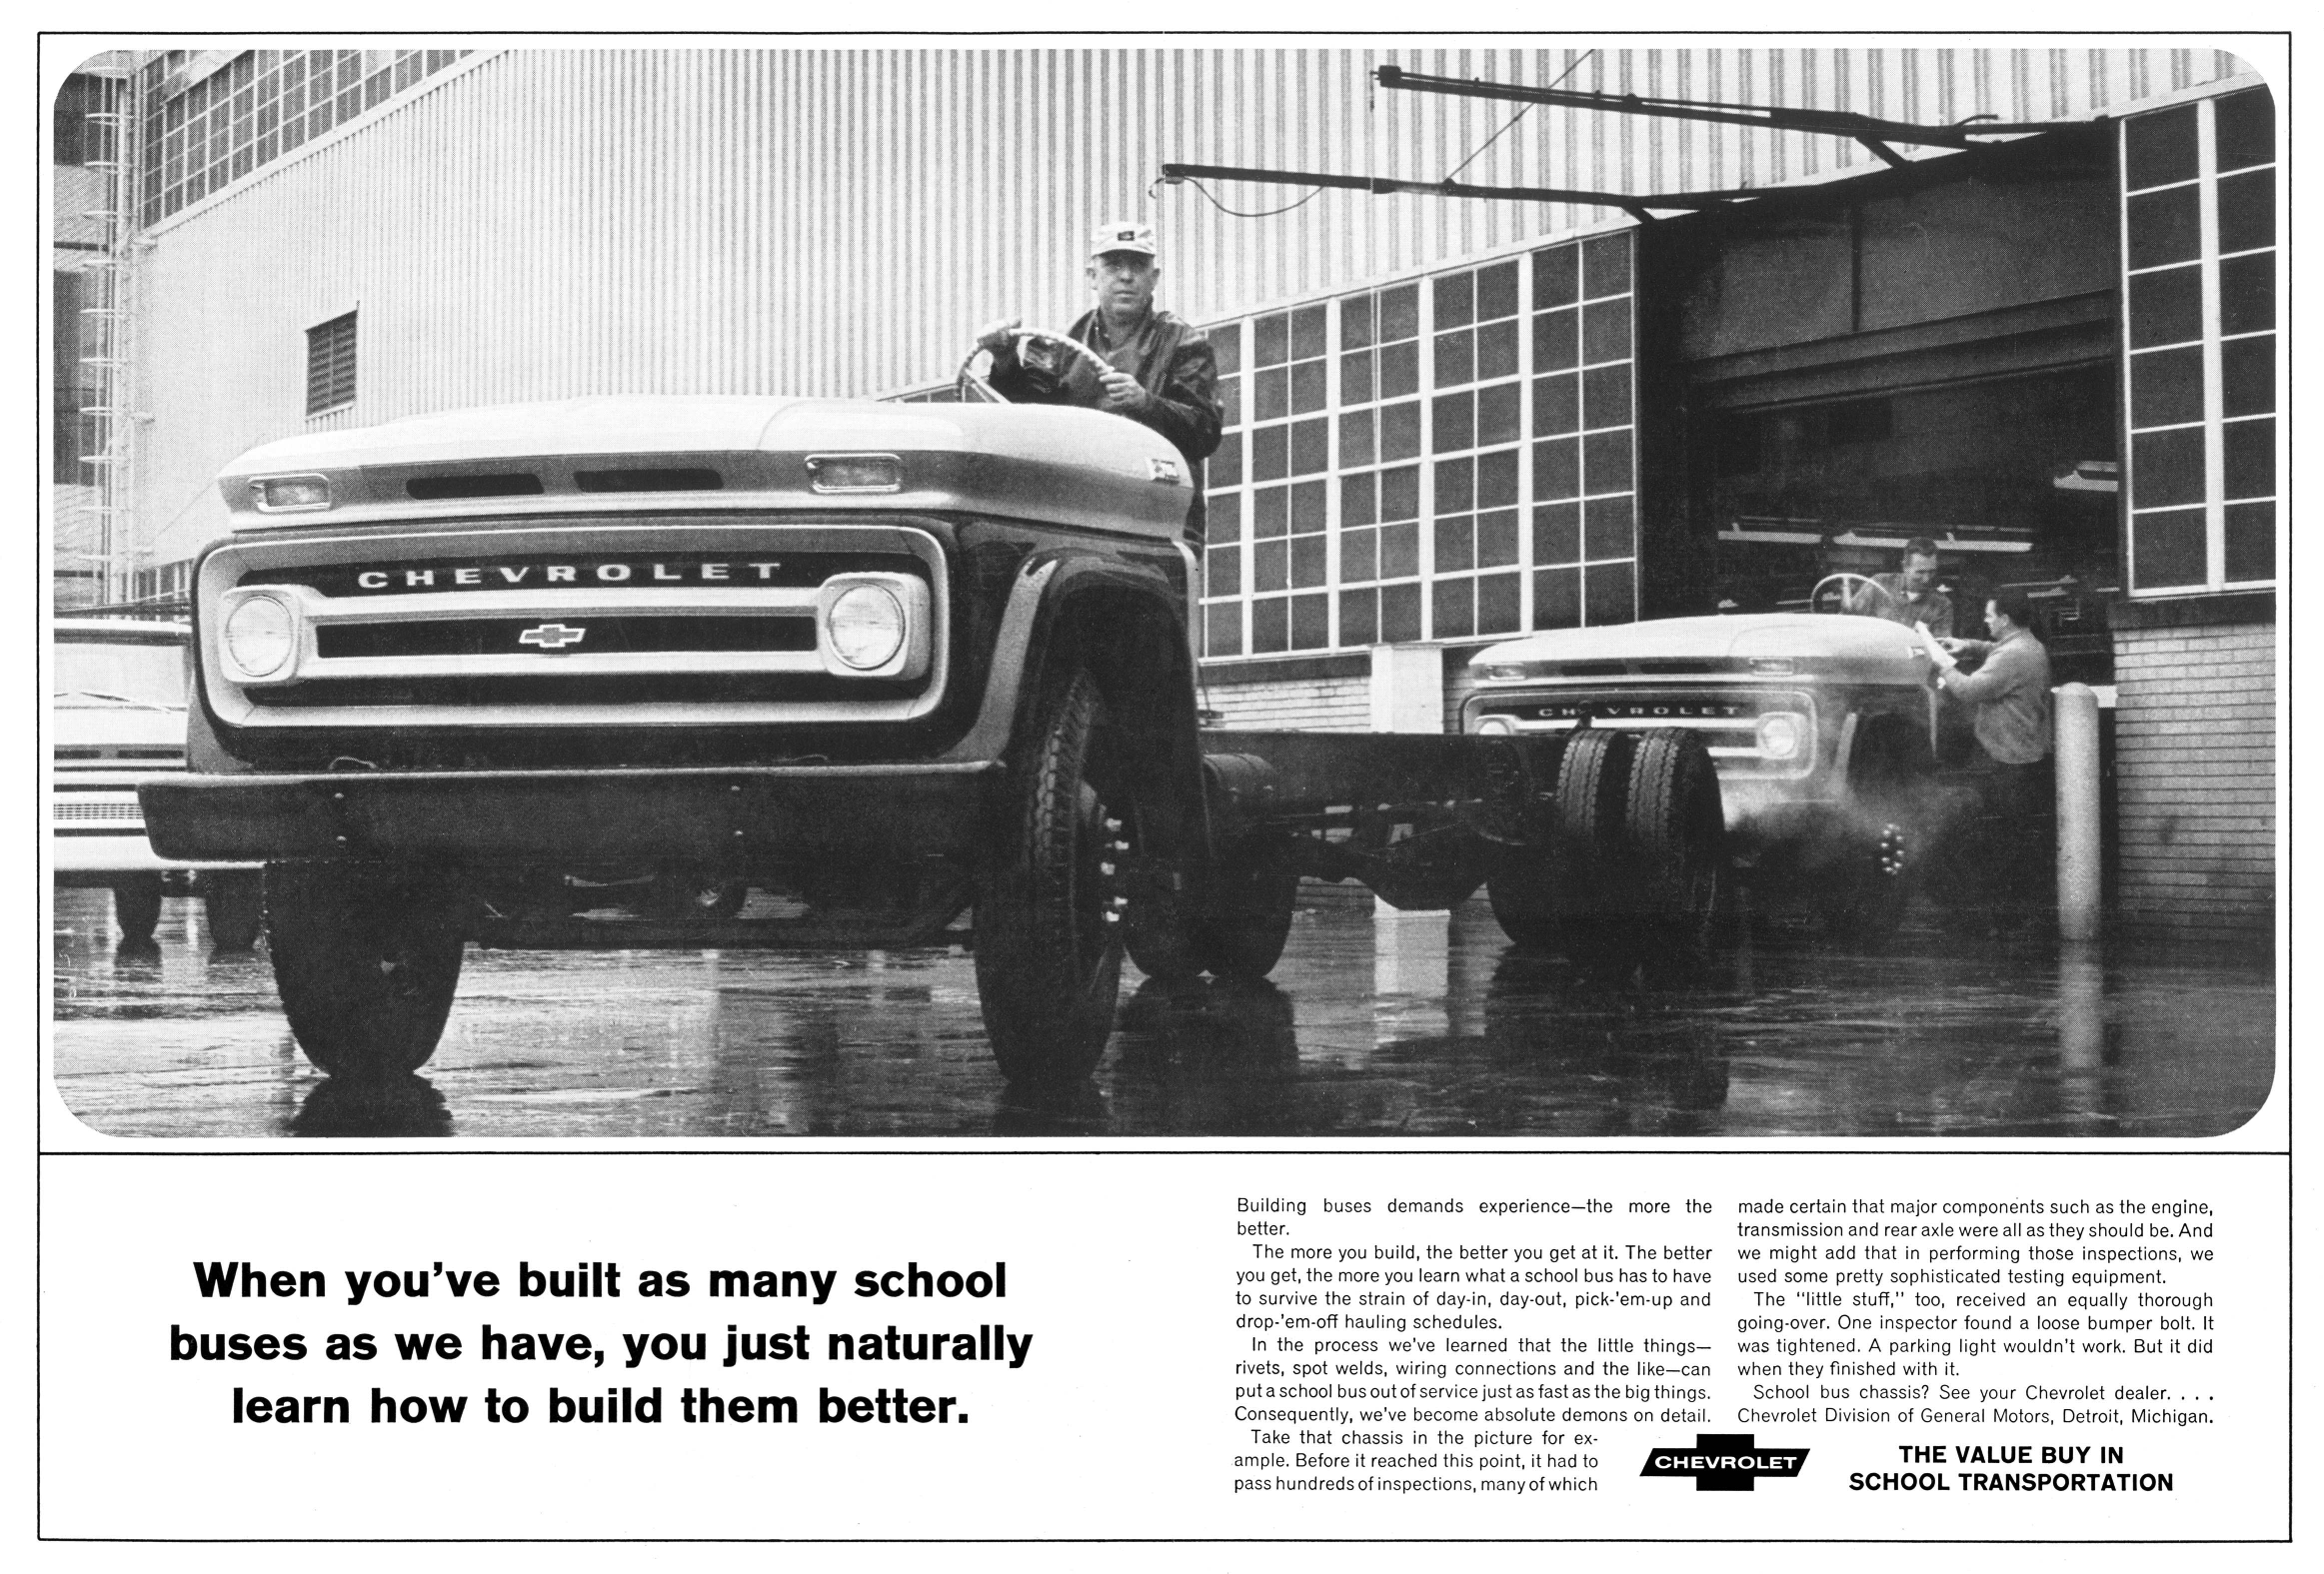 1965 Chevrolet Ad School Bus Chassis Guide "When you've built as many school buses as we have..."